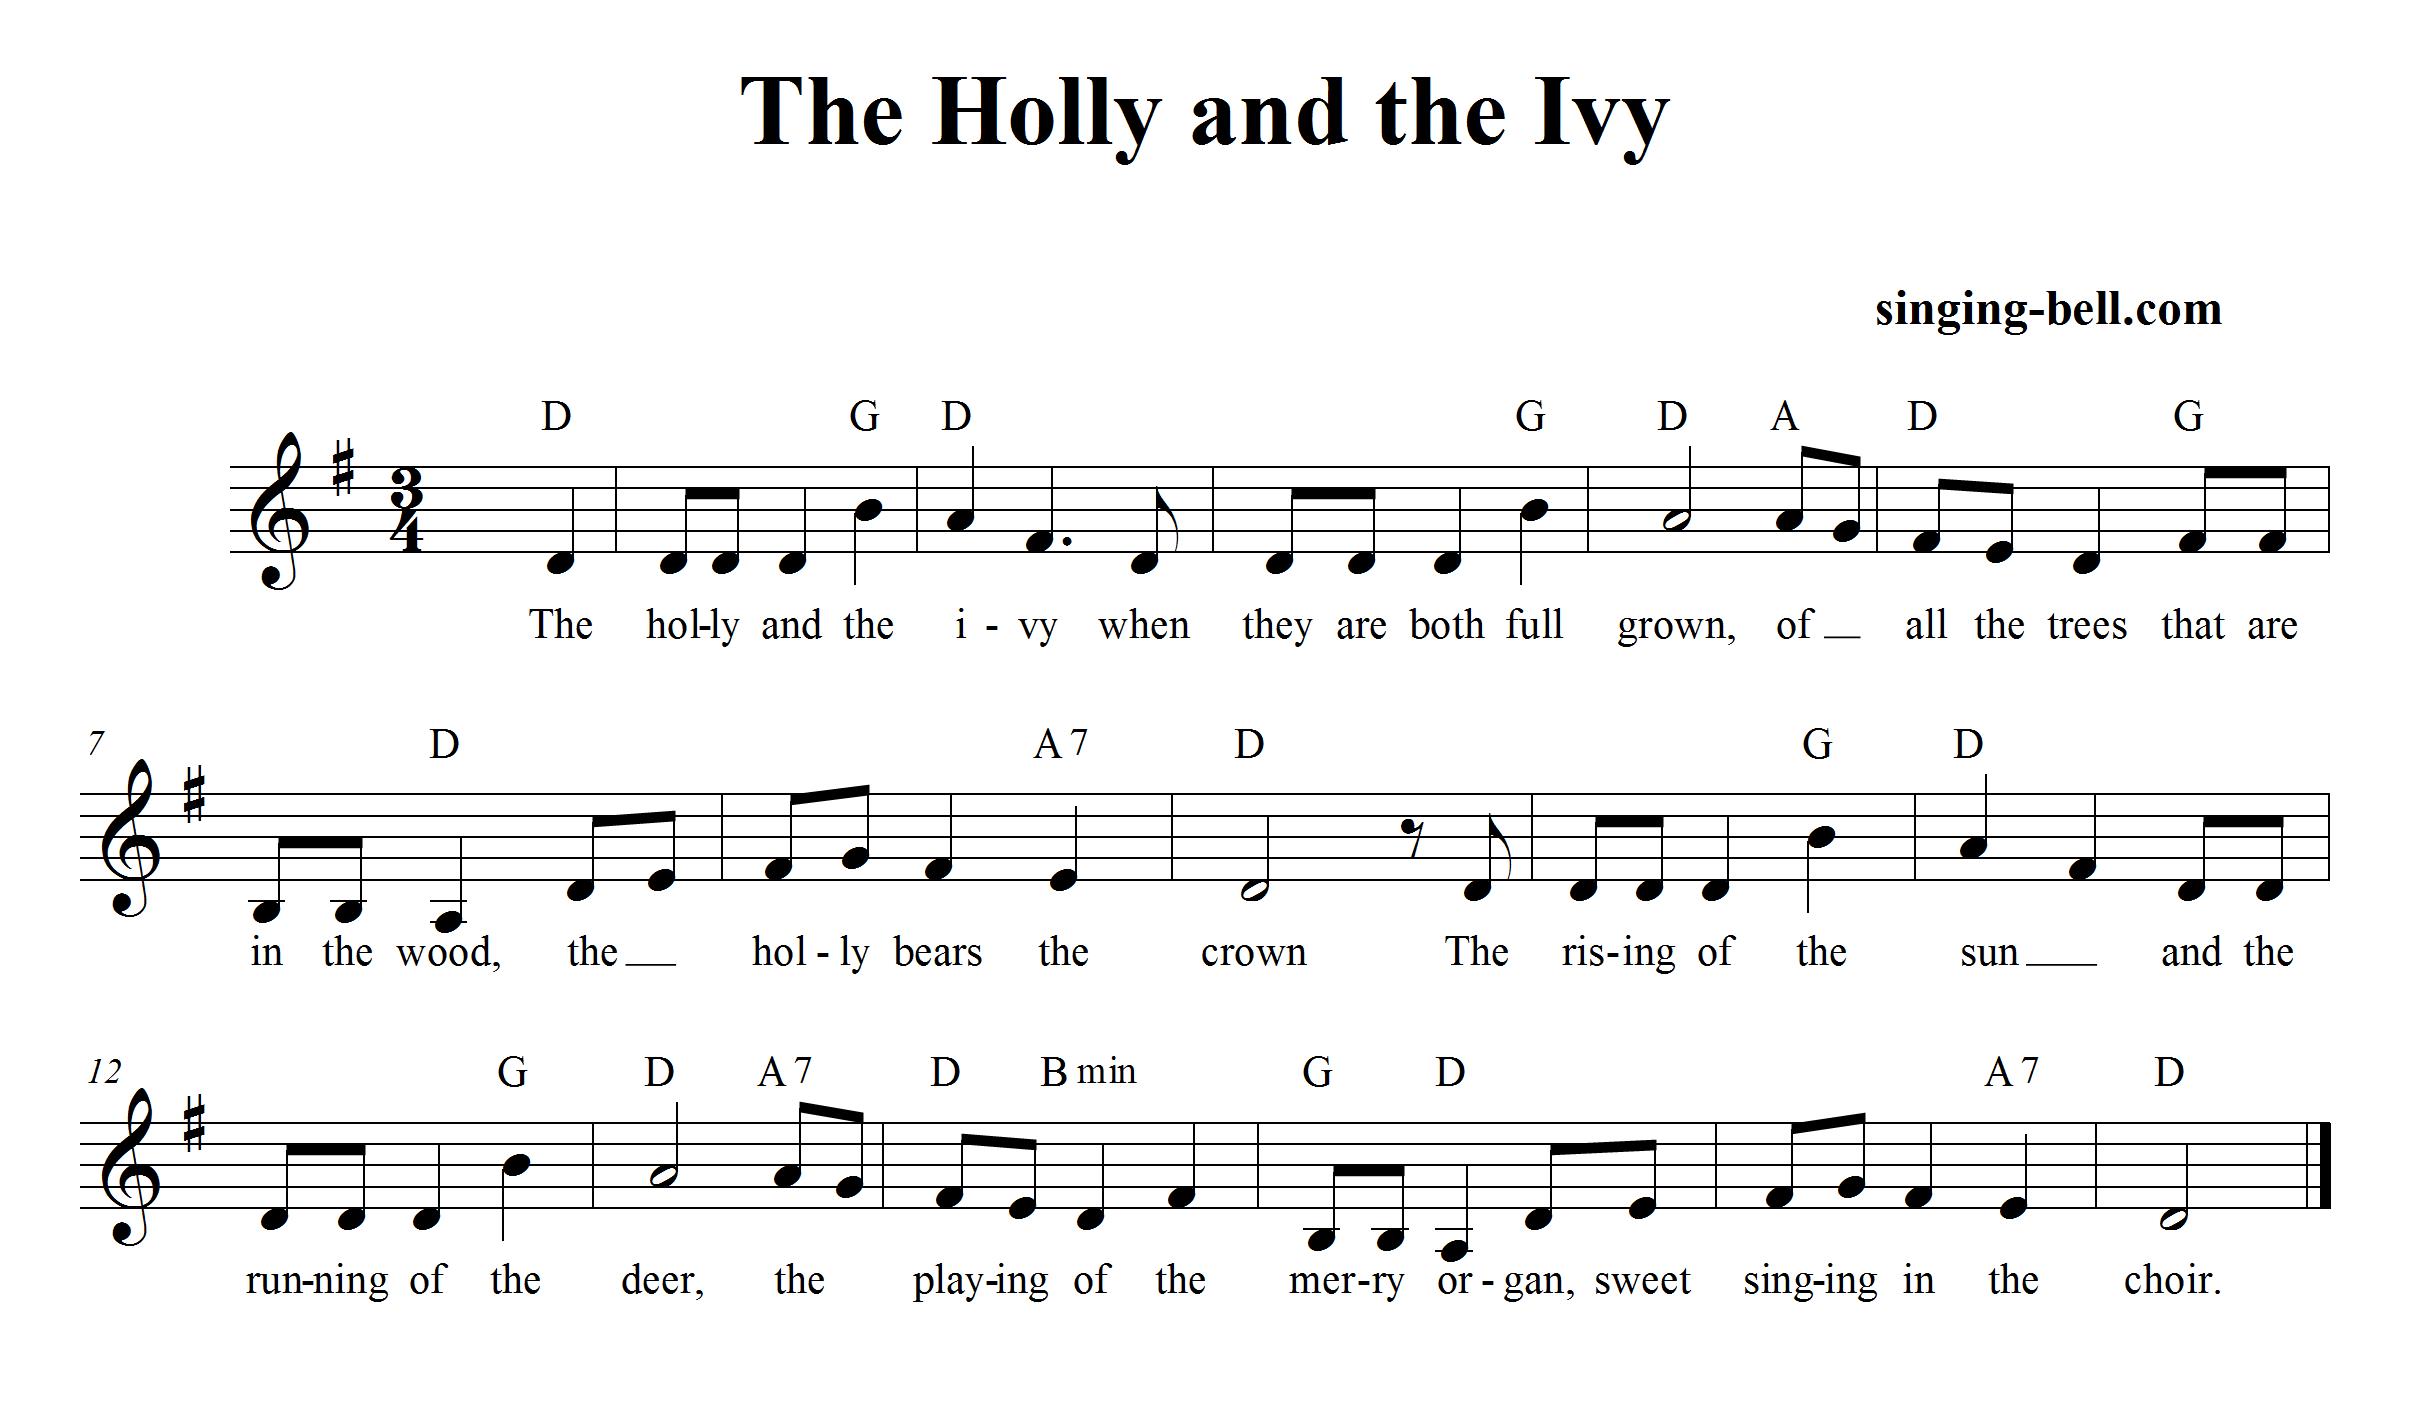 The Holly and the Ivy - Free Christmas Music Score Download